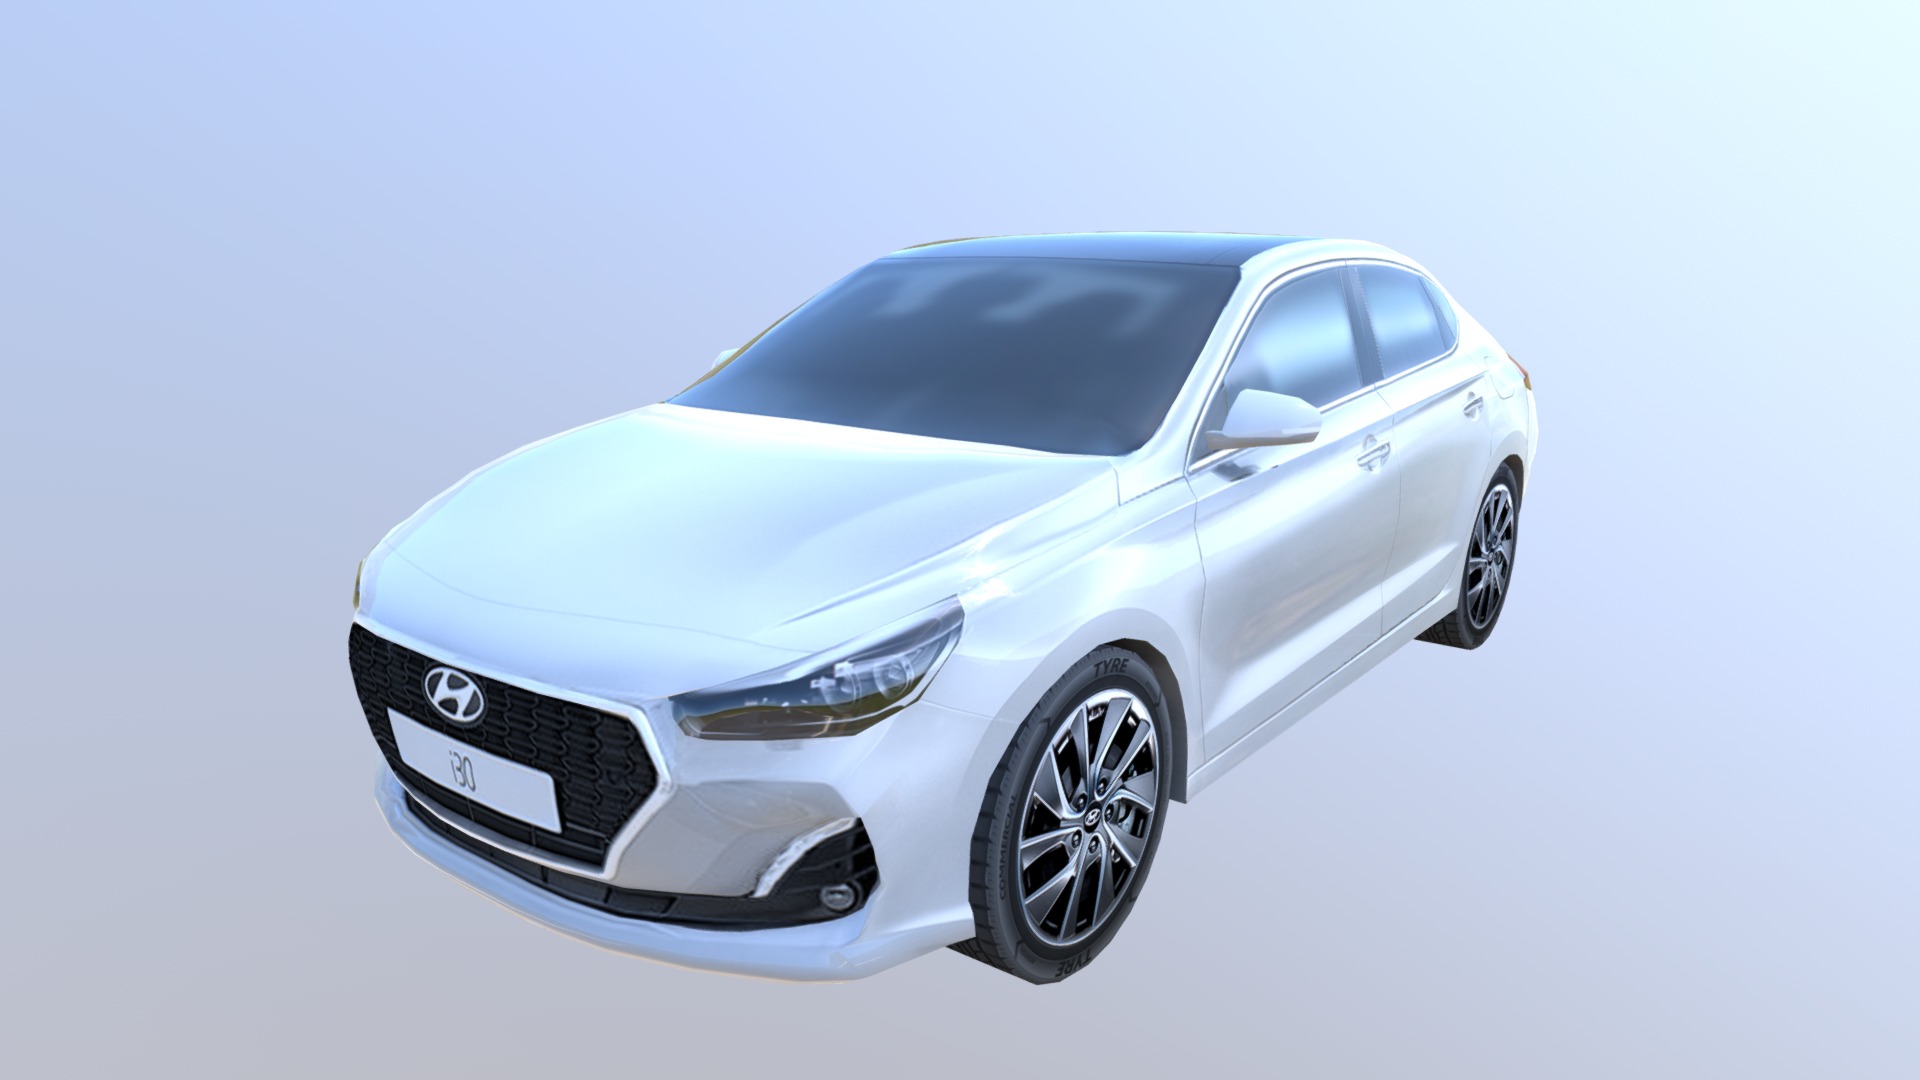 3D model Hyundai i30 Fastback - This is a 3D model of the Hyundai i30 Fastback. The 3D model is about a white car with a blue background.